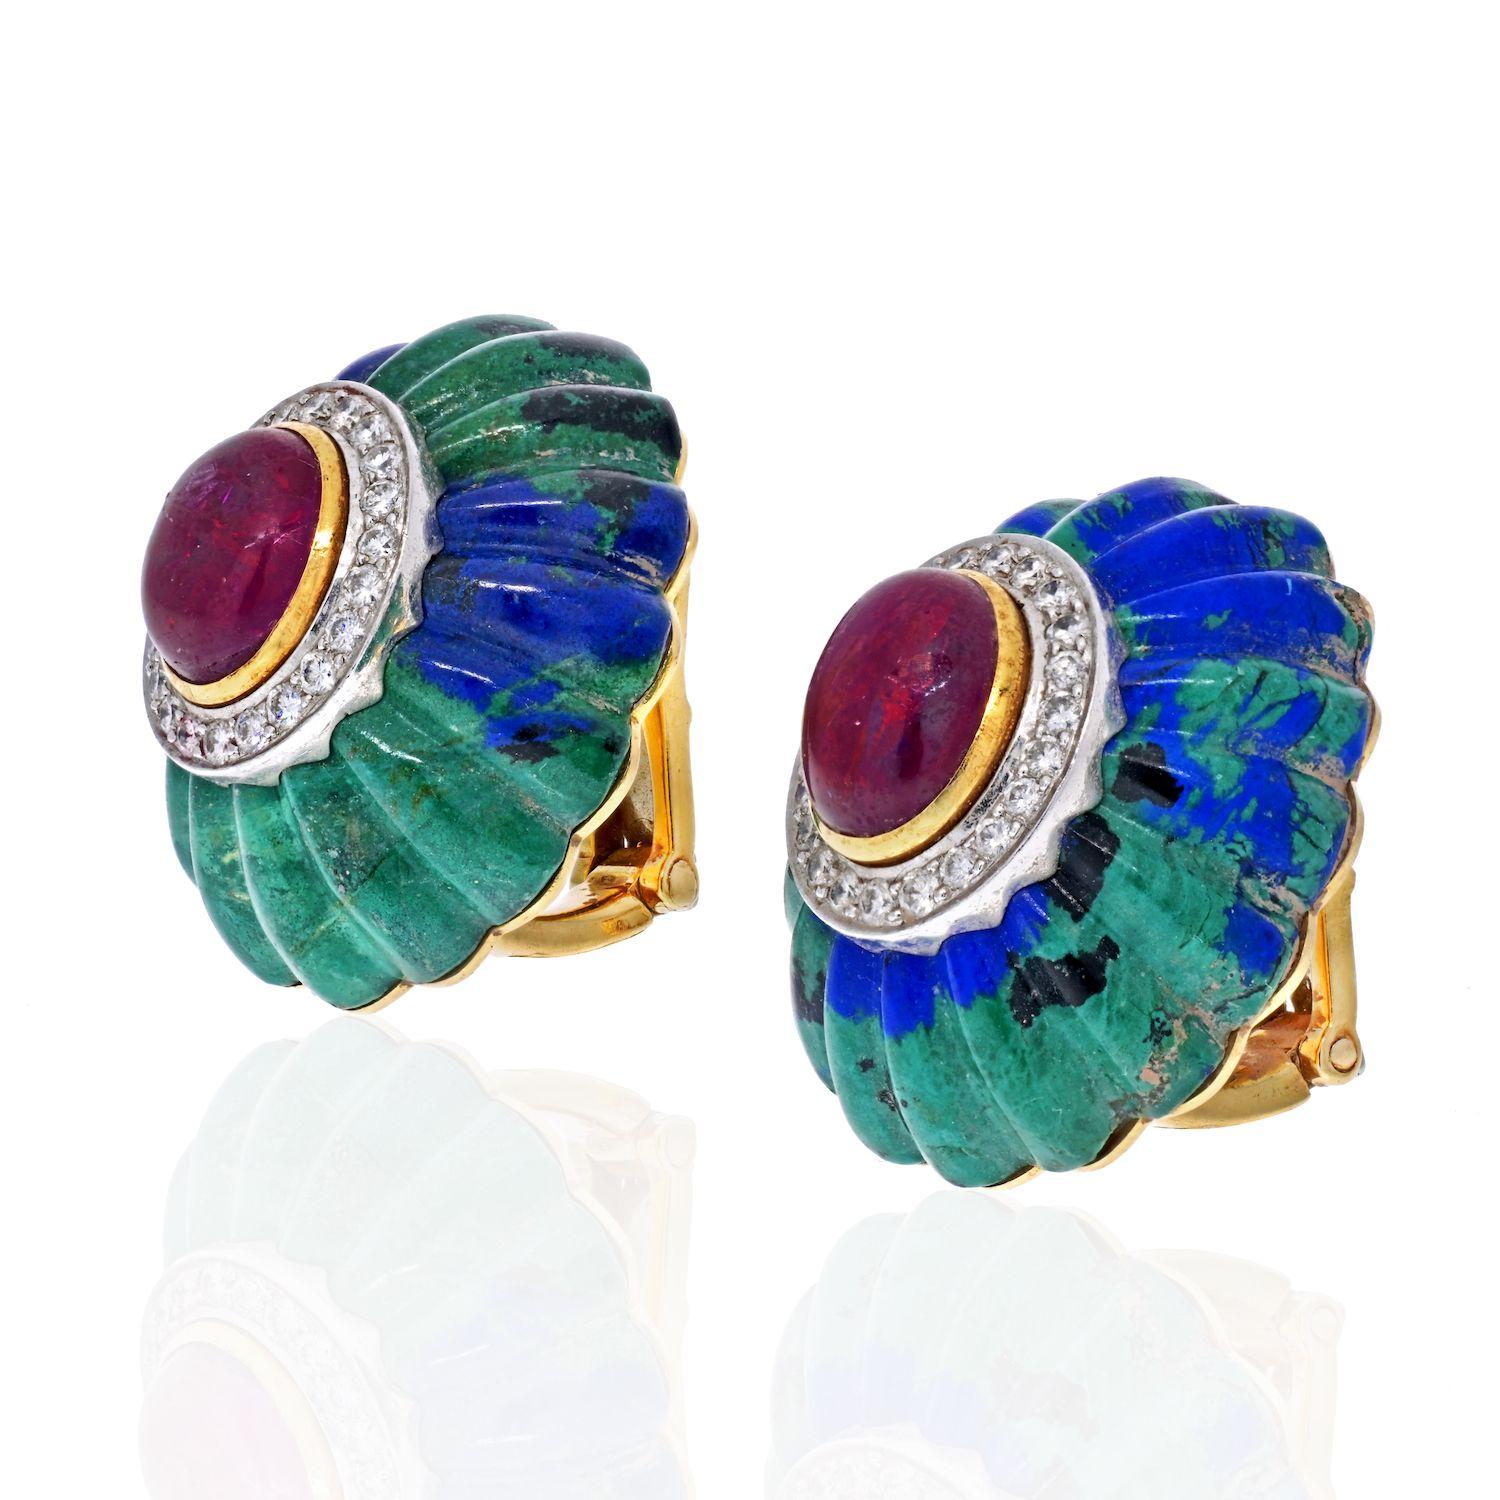 From renown New York jewelry designer David Webb we offer a pair of 1970s 18K gold ear clips of hand carved azurite-malachite set with a cabochon ruby framed in a surround of gold with platinum set diamonds. Measuring 5/8 inch x 1 inch. Maker and